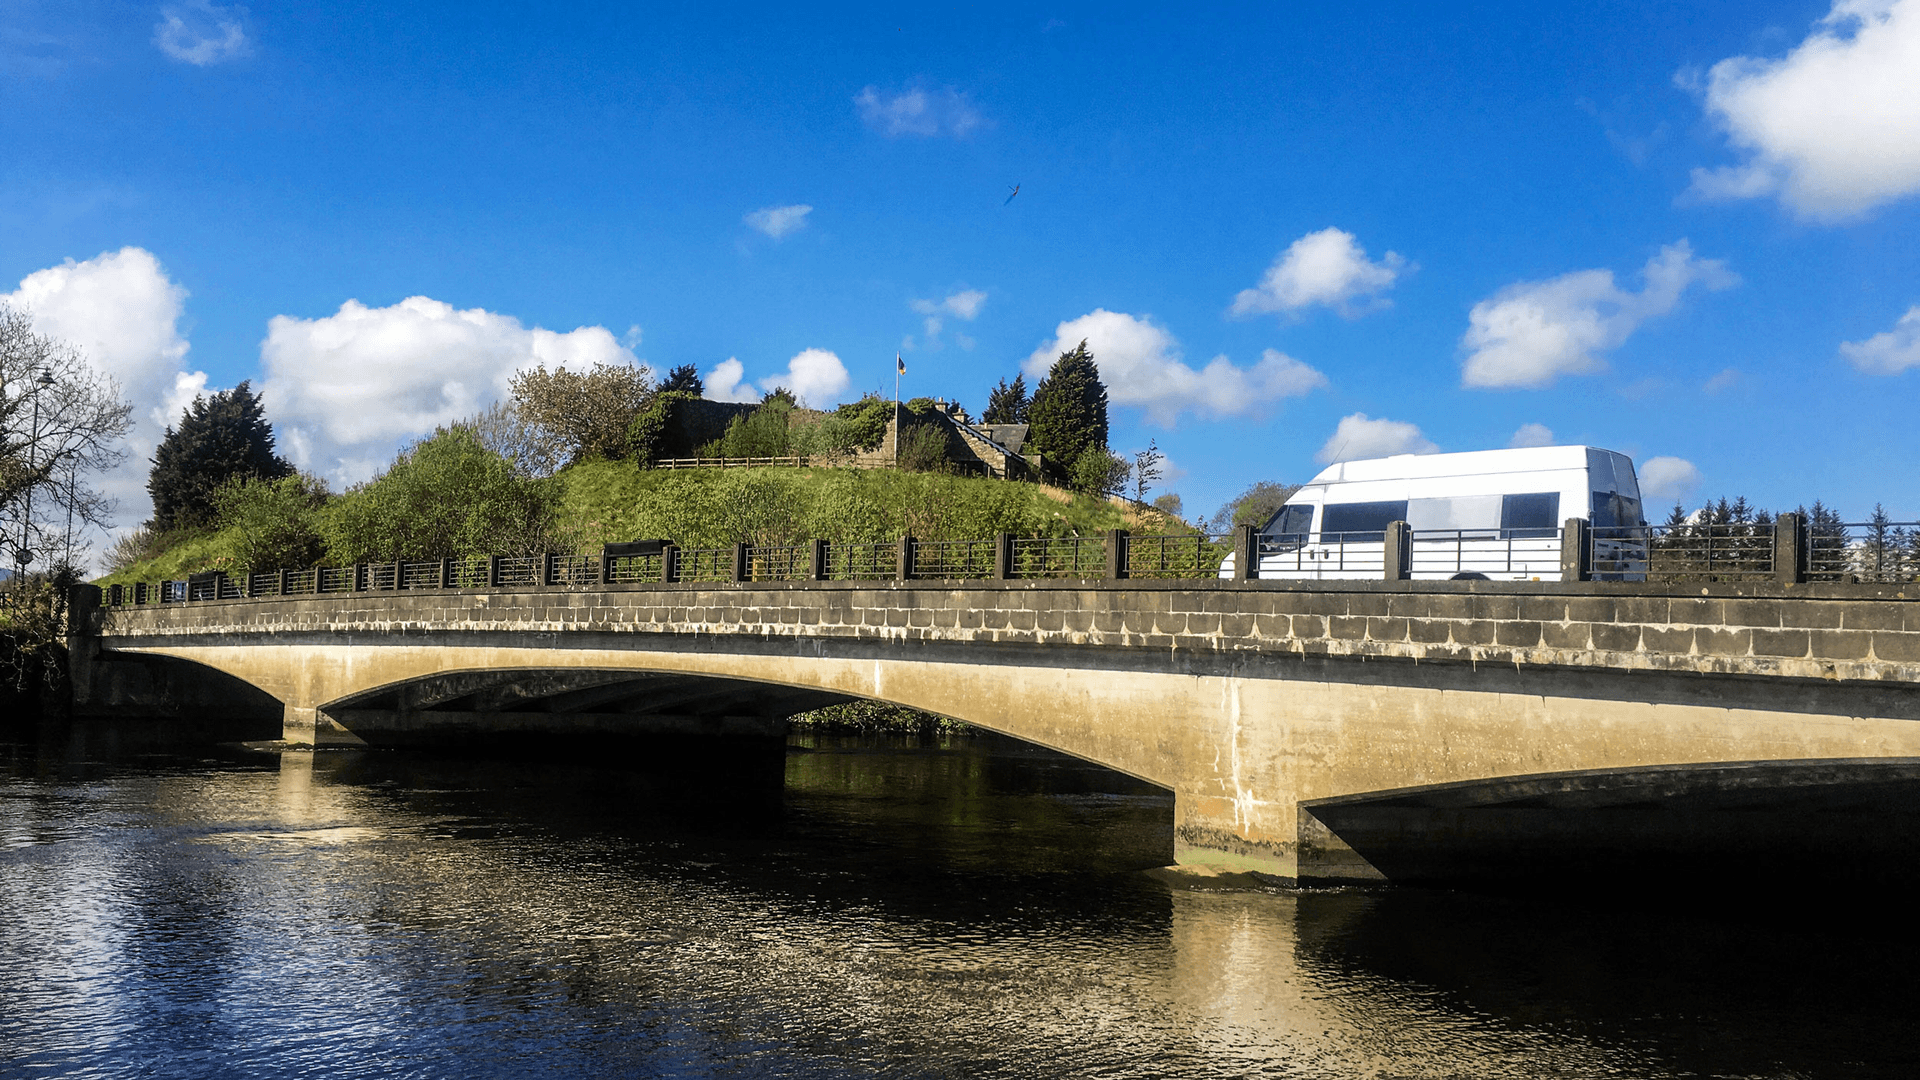 A white van travels over a grey stone bridge on a bright, sunny day under blue skies.  